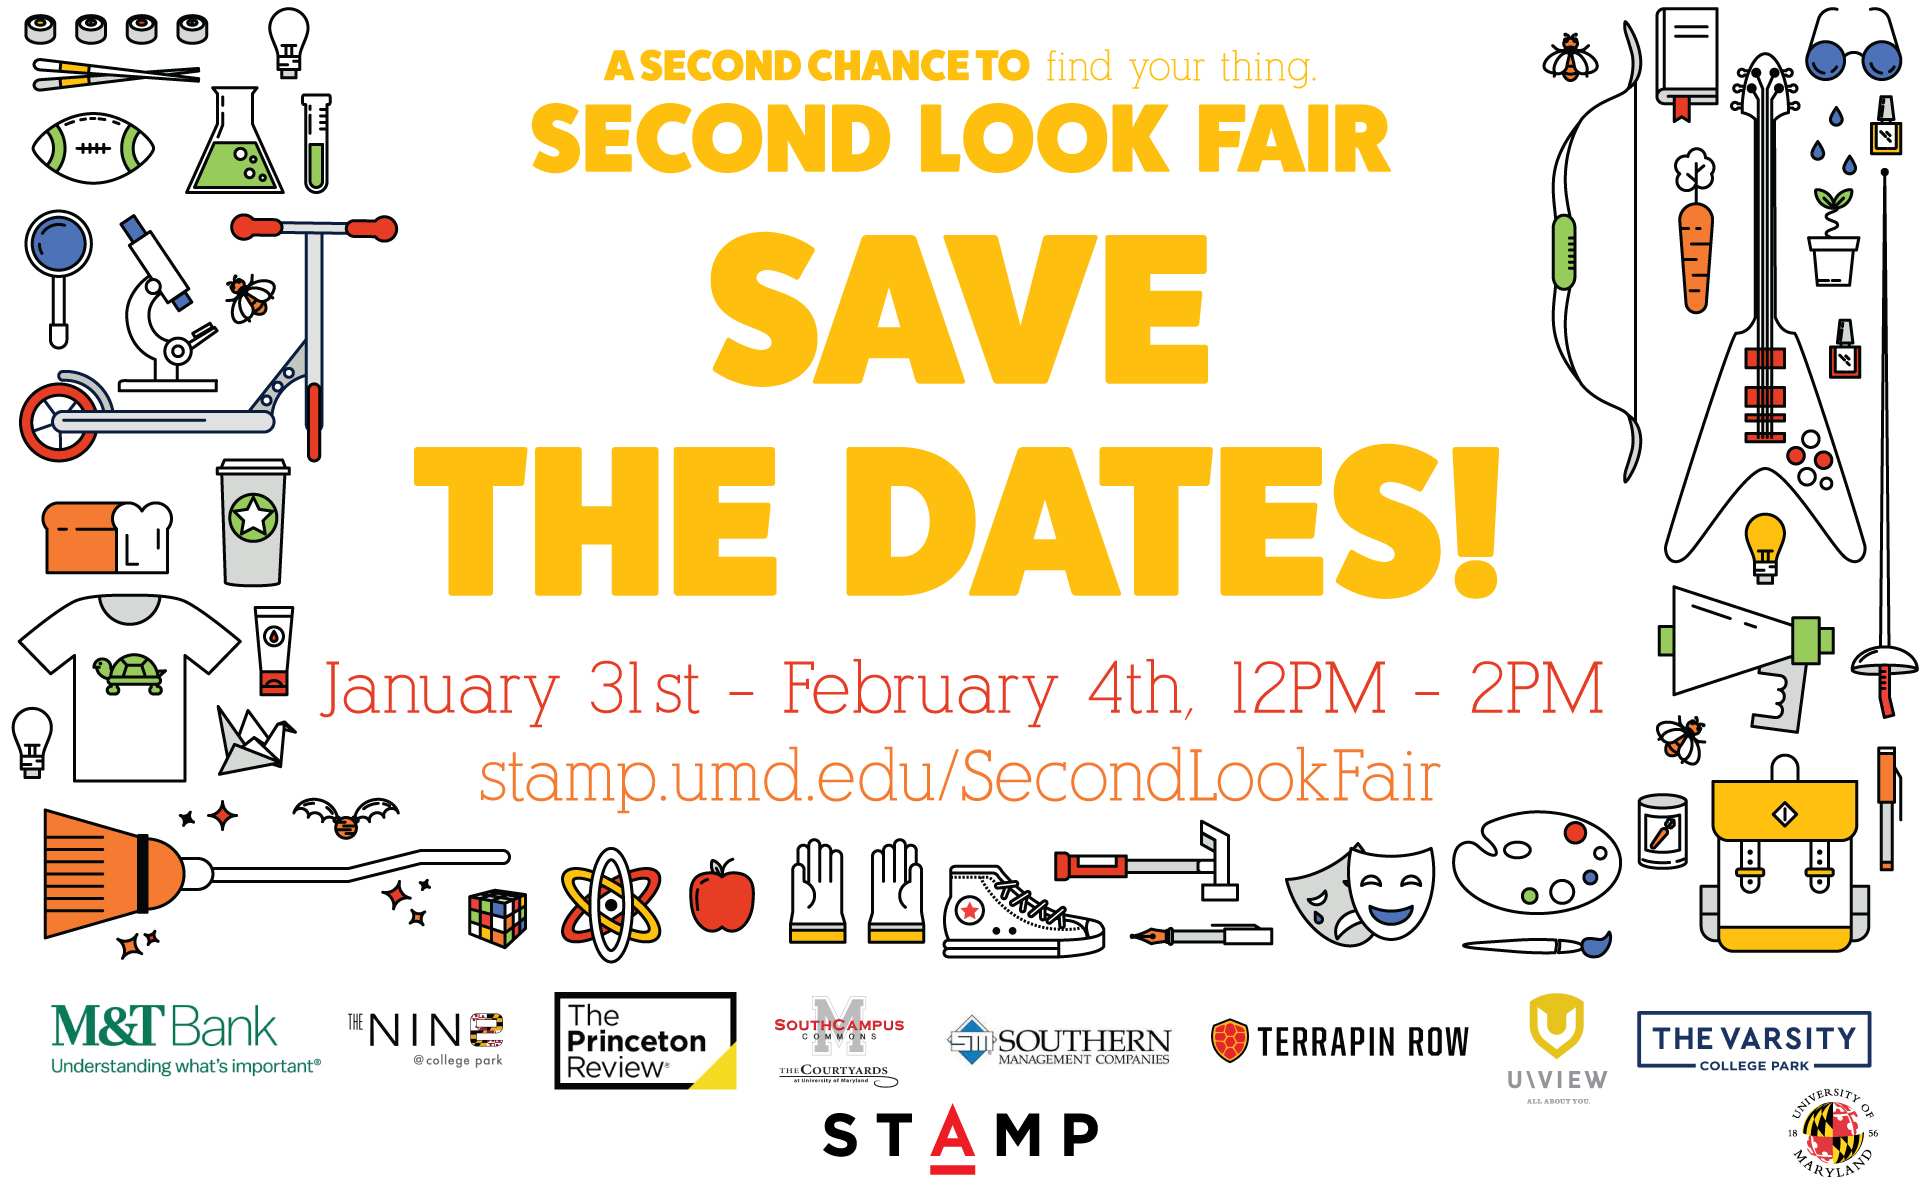 Second Look Fair Save the Dates January 31st to February 4th, 12pm to 2pm